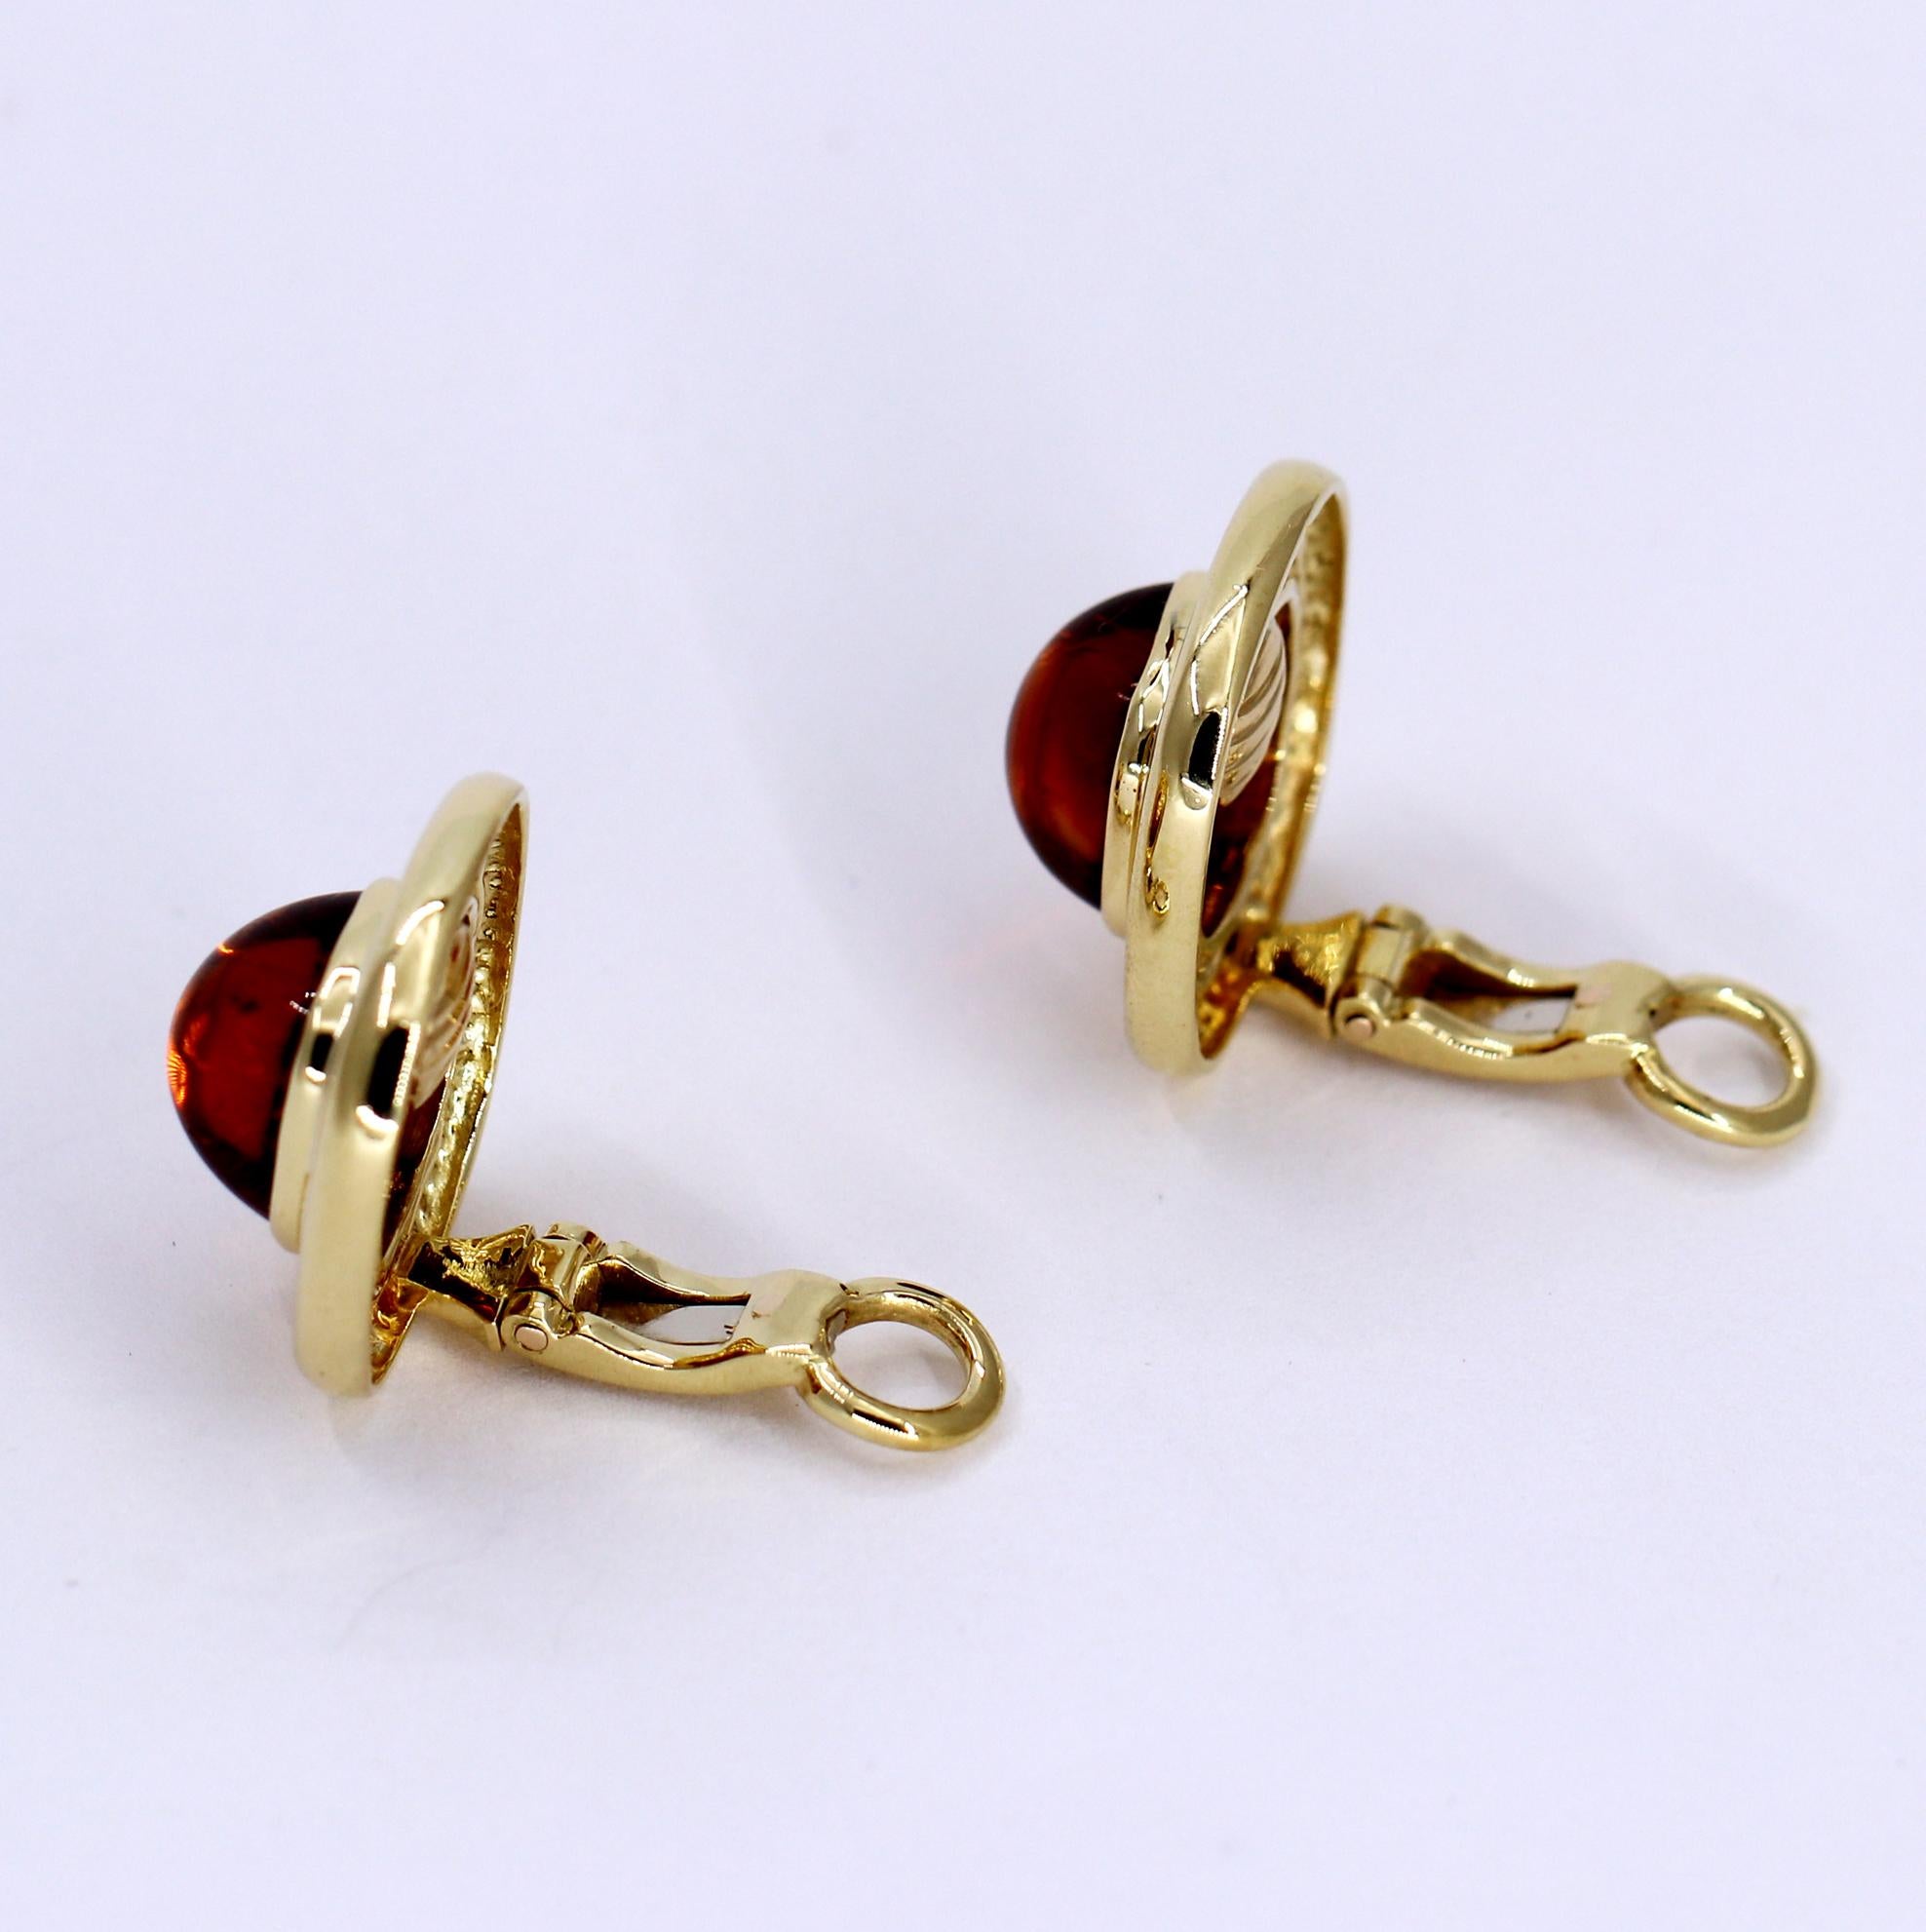 These beautifully made, high quality 18K yellow gold cushion shaped clip on earrings are set with two cushion shaped cabochon citrines. Measuring 3/4 inch by 3/4 inch, they weigh 18.1 grams overall.